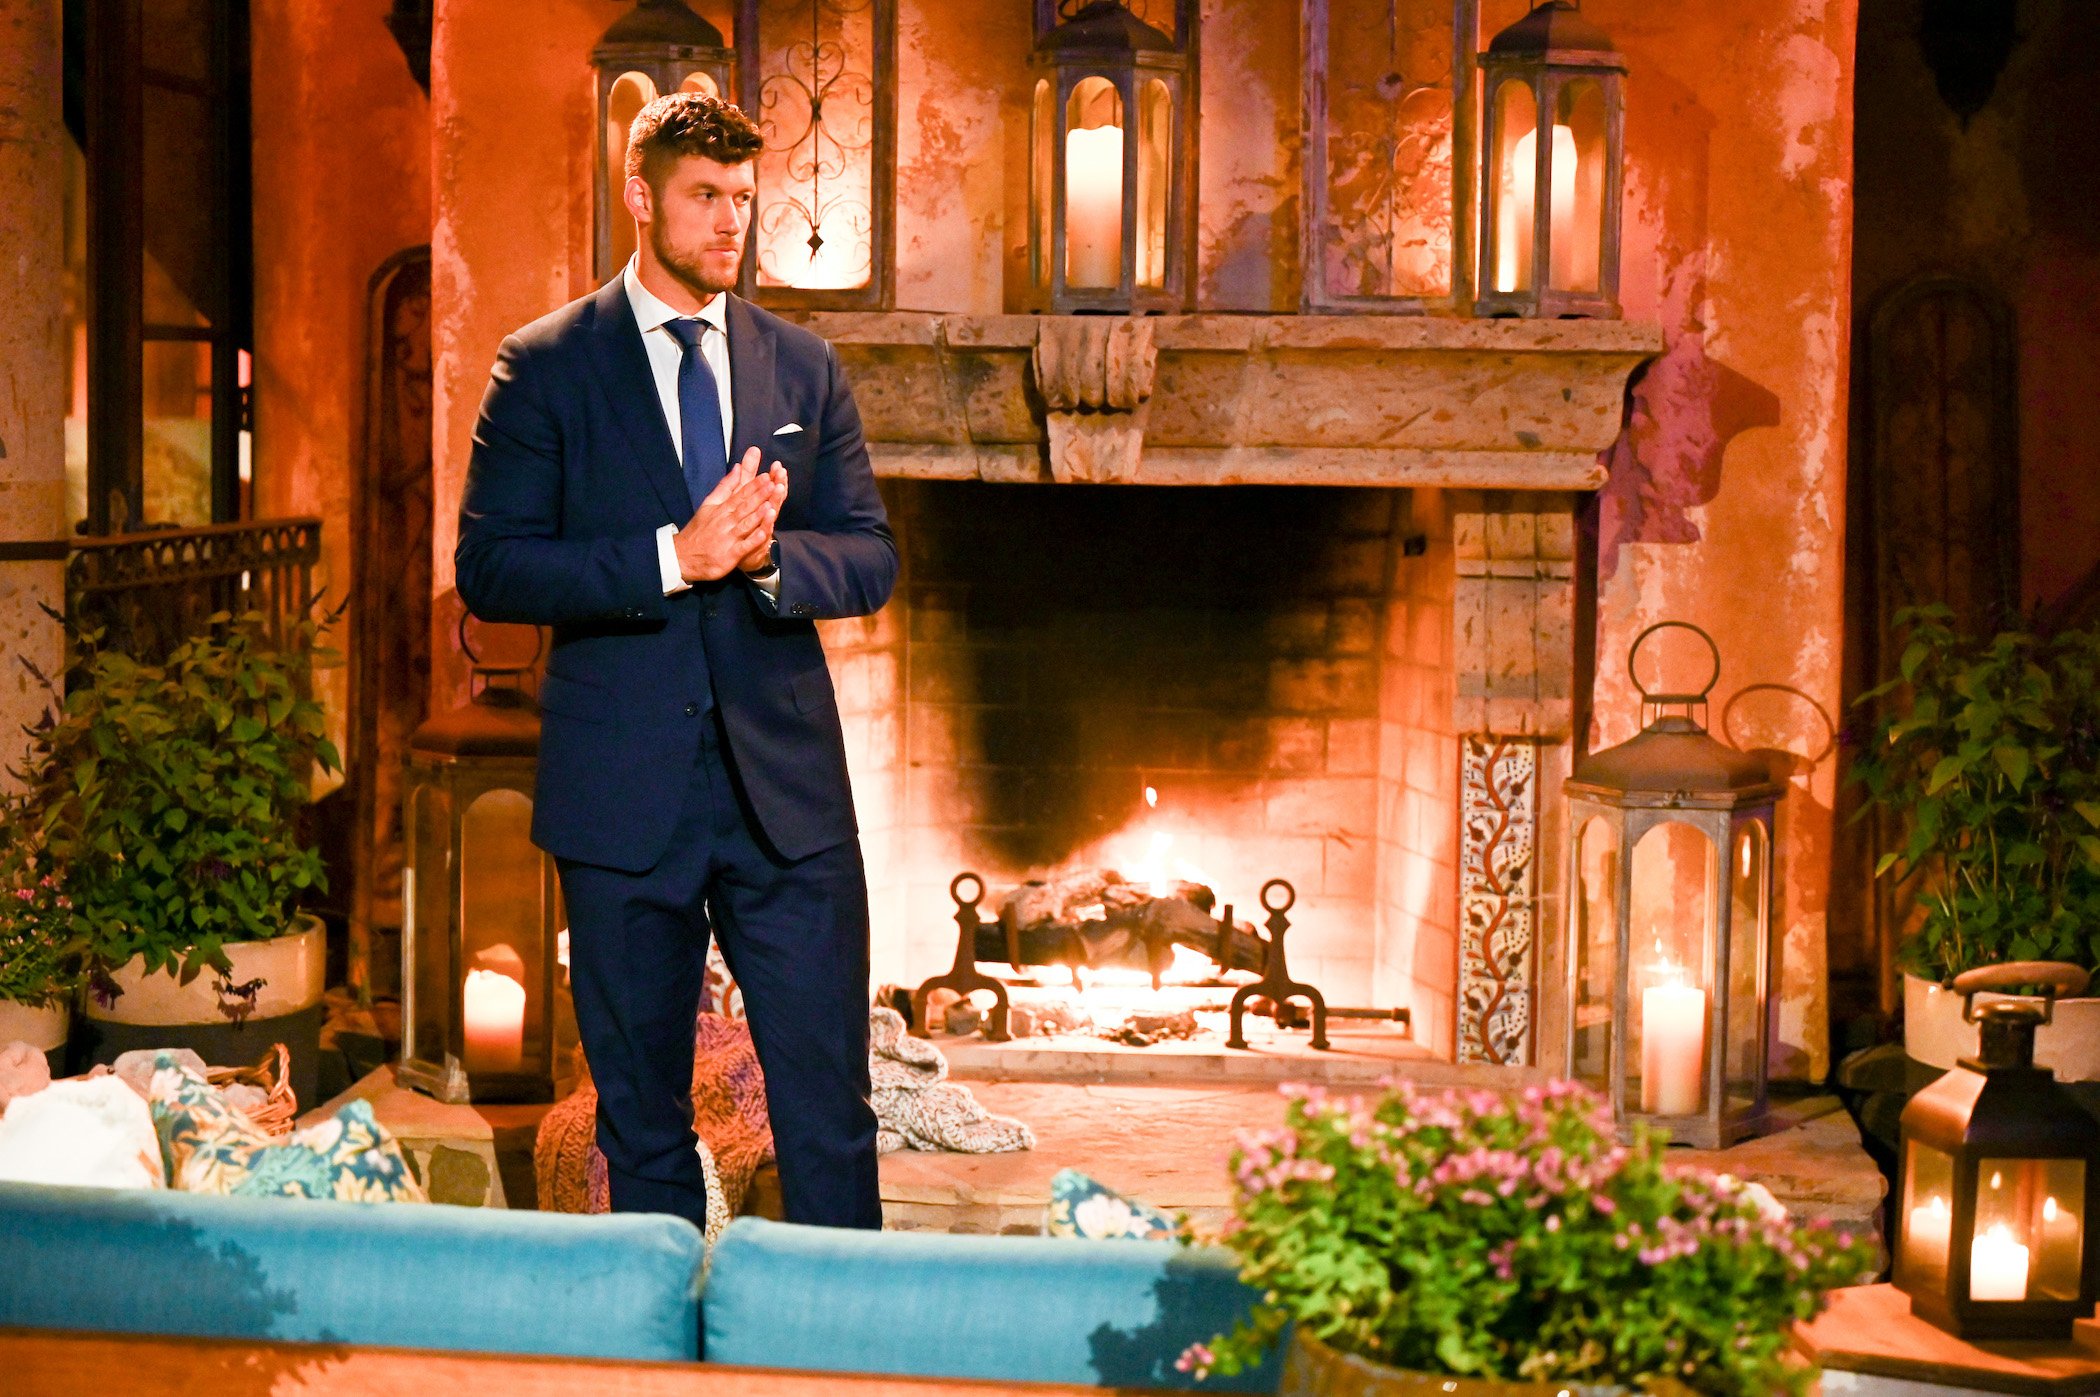 'The Bachelor' lead Clayton Echard standing alone in the 'Bachelor' mansion wearing a suit